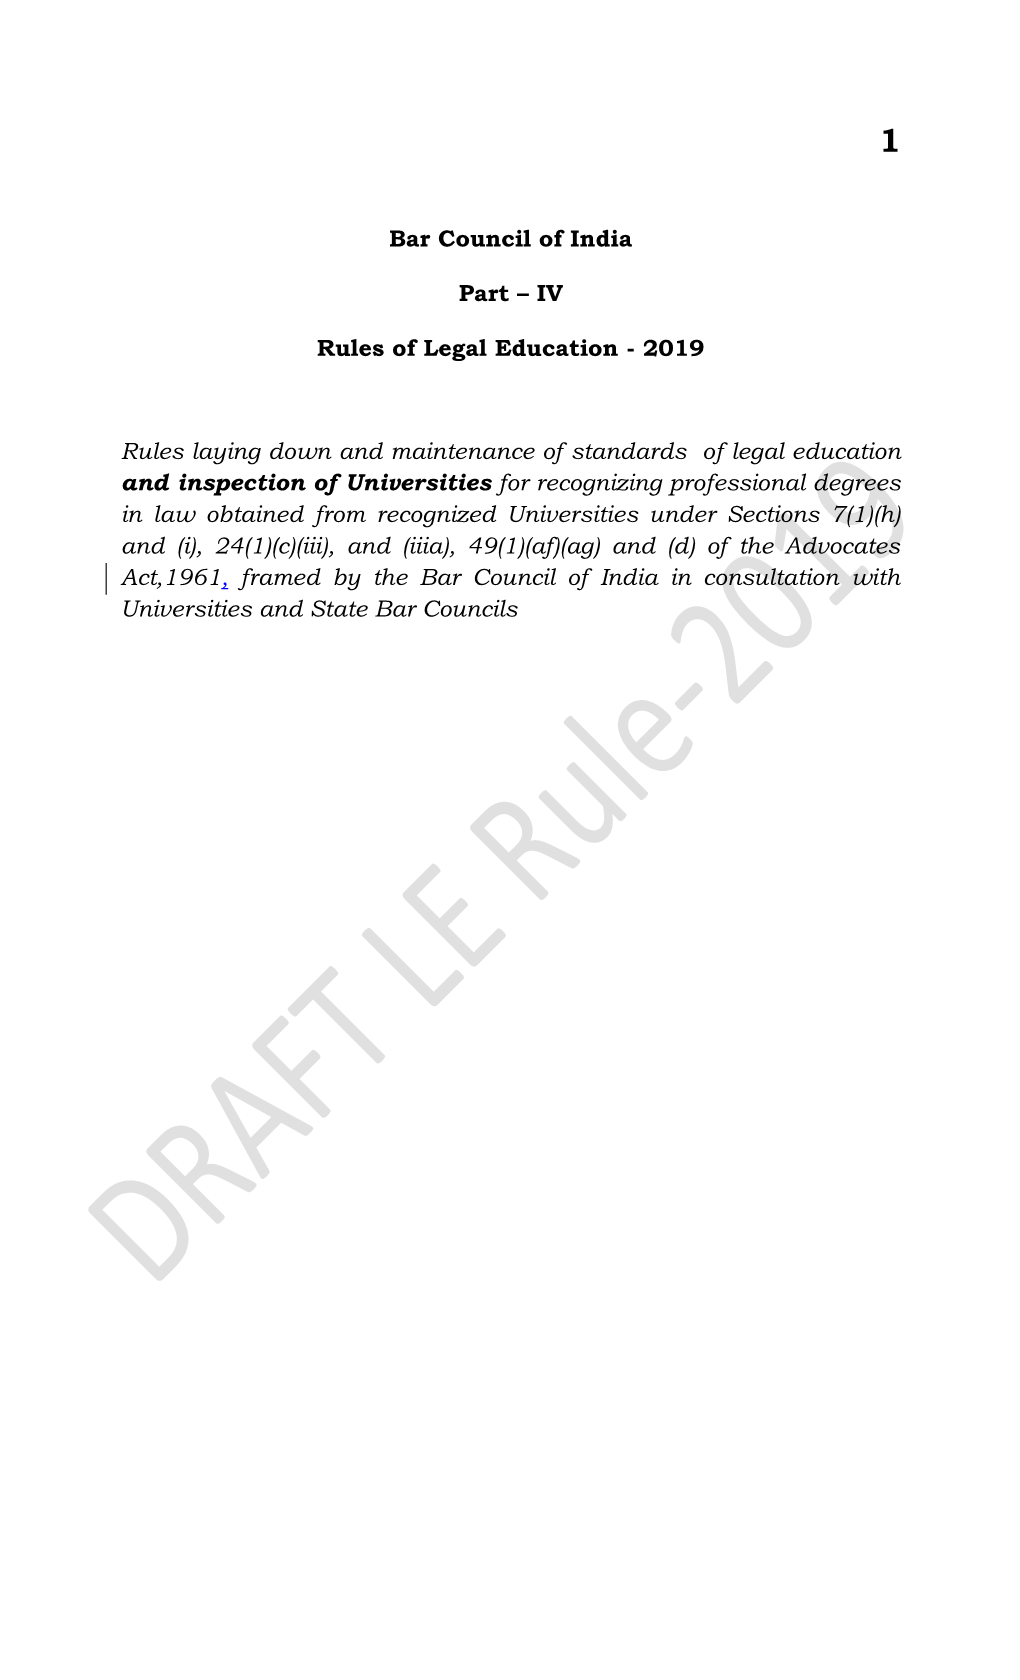 Bar Council of India Part – IV Rules of Legal Education